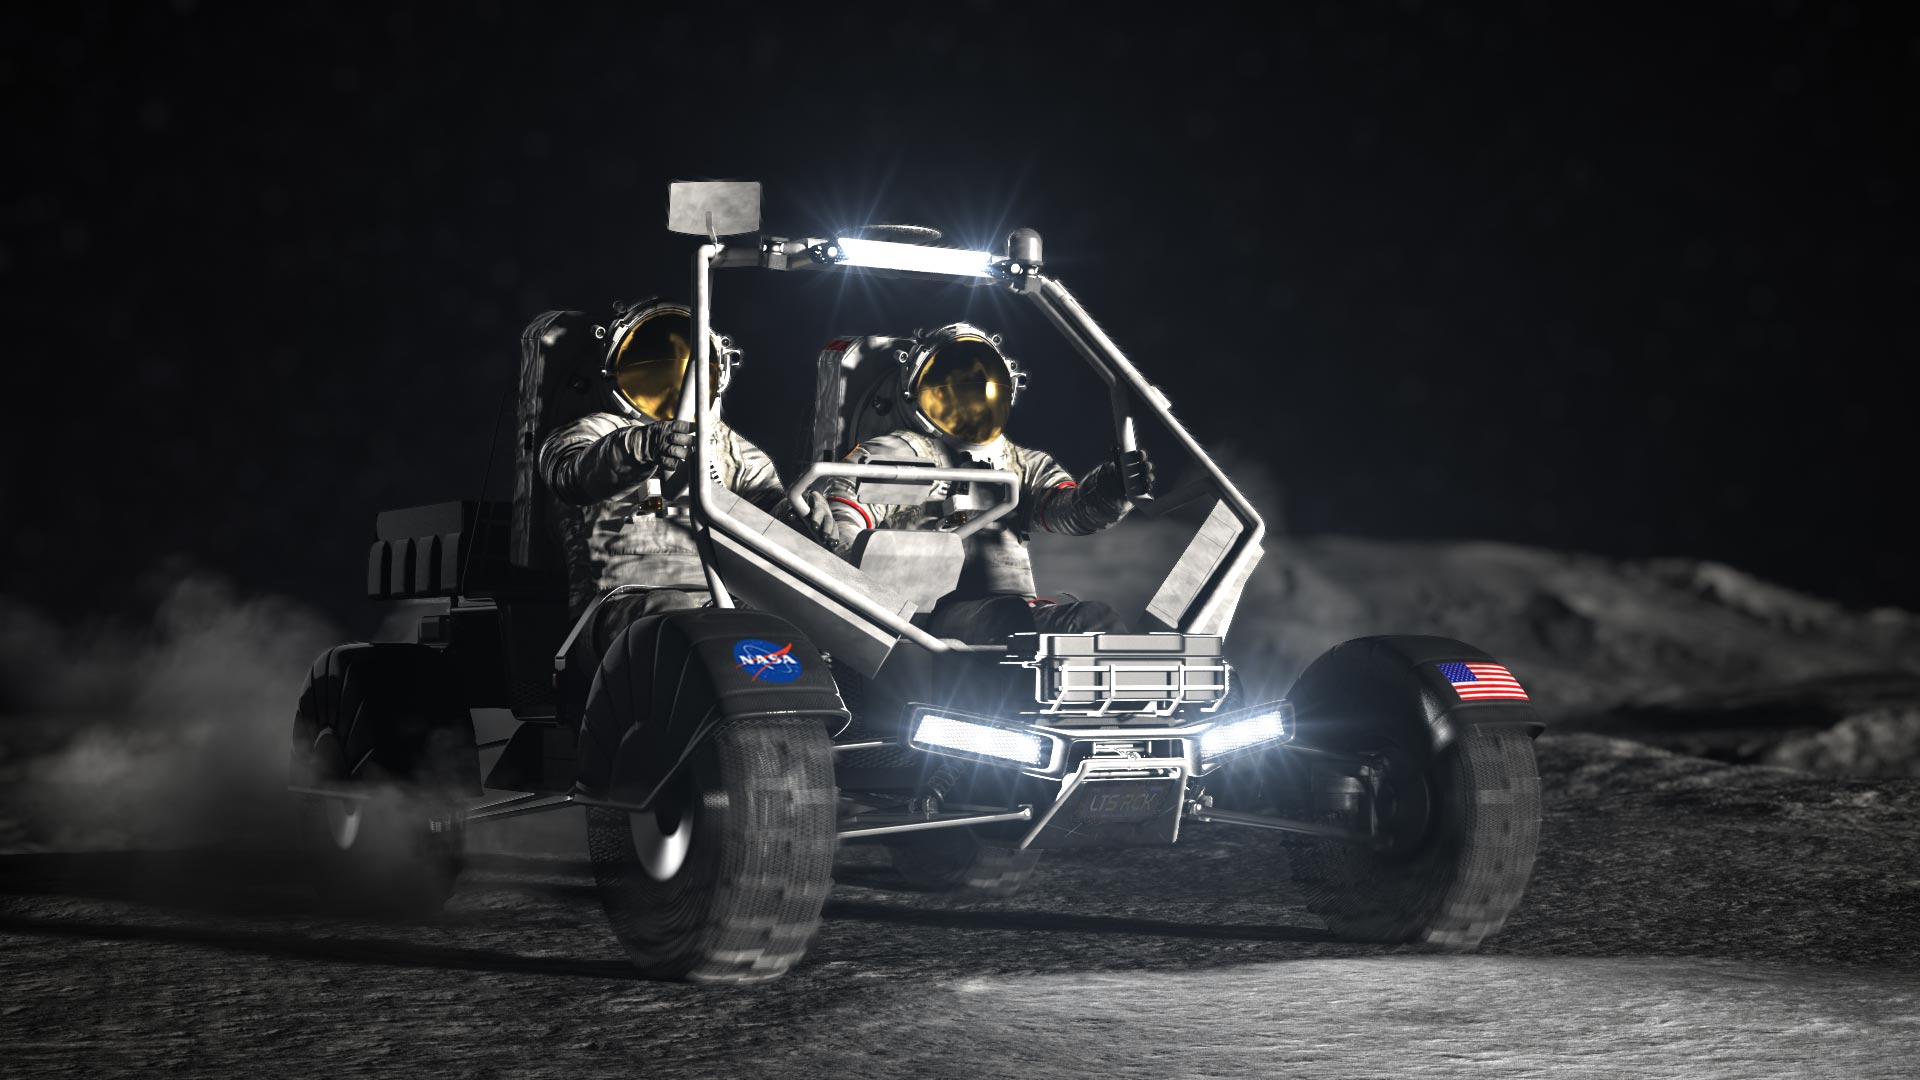 Driving on the Moon: NASA Pursues Next-Generation Lunar Terrain Vehicle - SciTechDaily